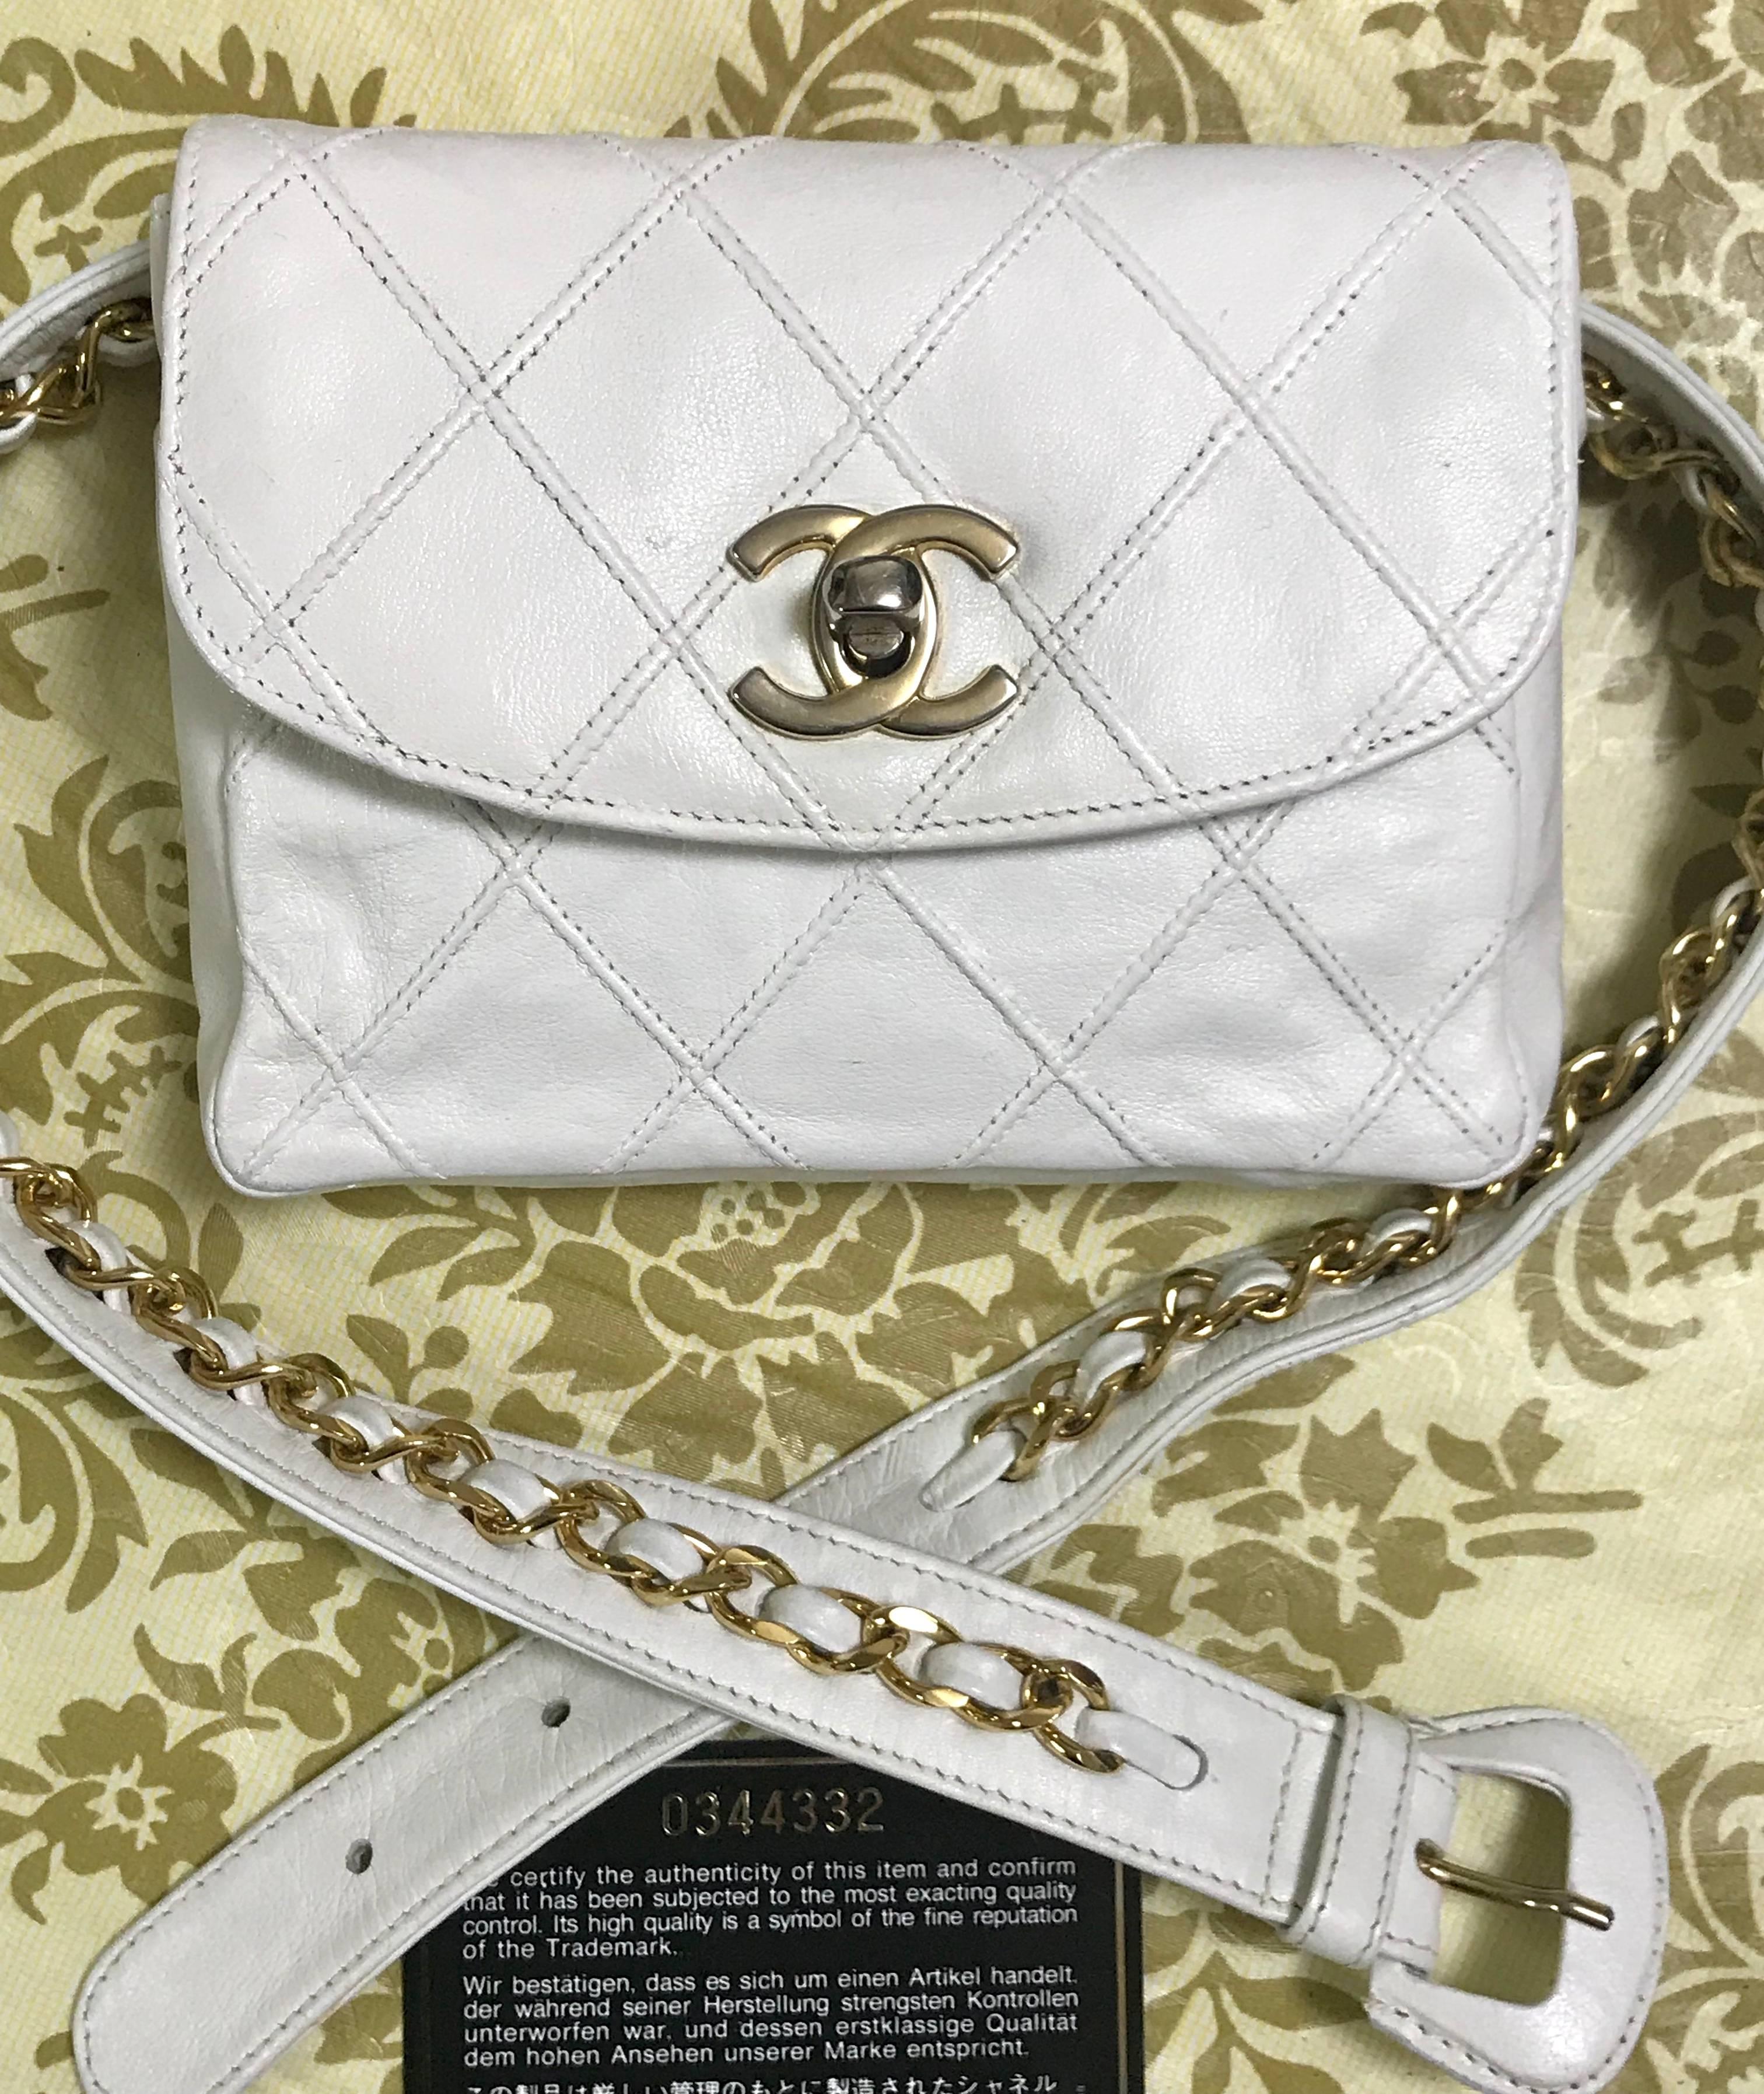 1980s. 1980s. Vintage CHANEL white leather waist purse, fanny pack, hip bag with gold CC closure and chain belt.  Good for waist size 25.5” through 27.5" (65~70cm)

Introducing a vintage CHANEL white calfskin waist bag, fanny pack with gold